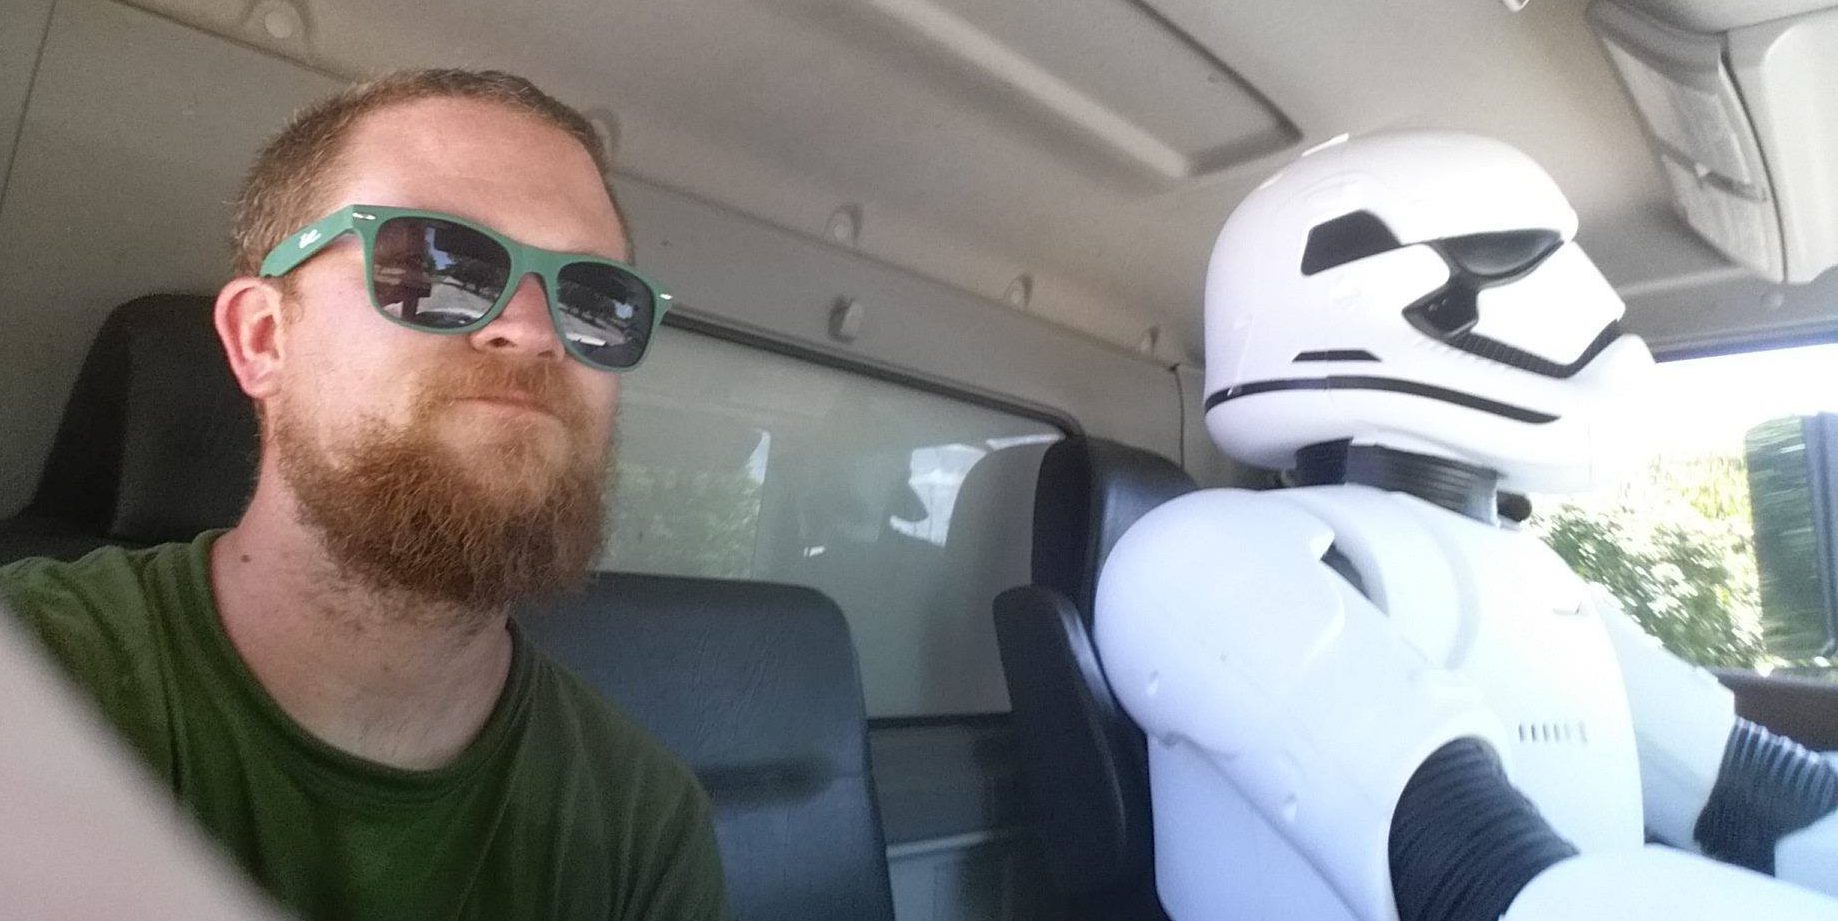 A mover posing with a stormtrooper